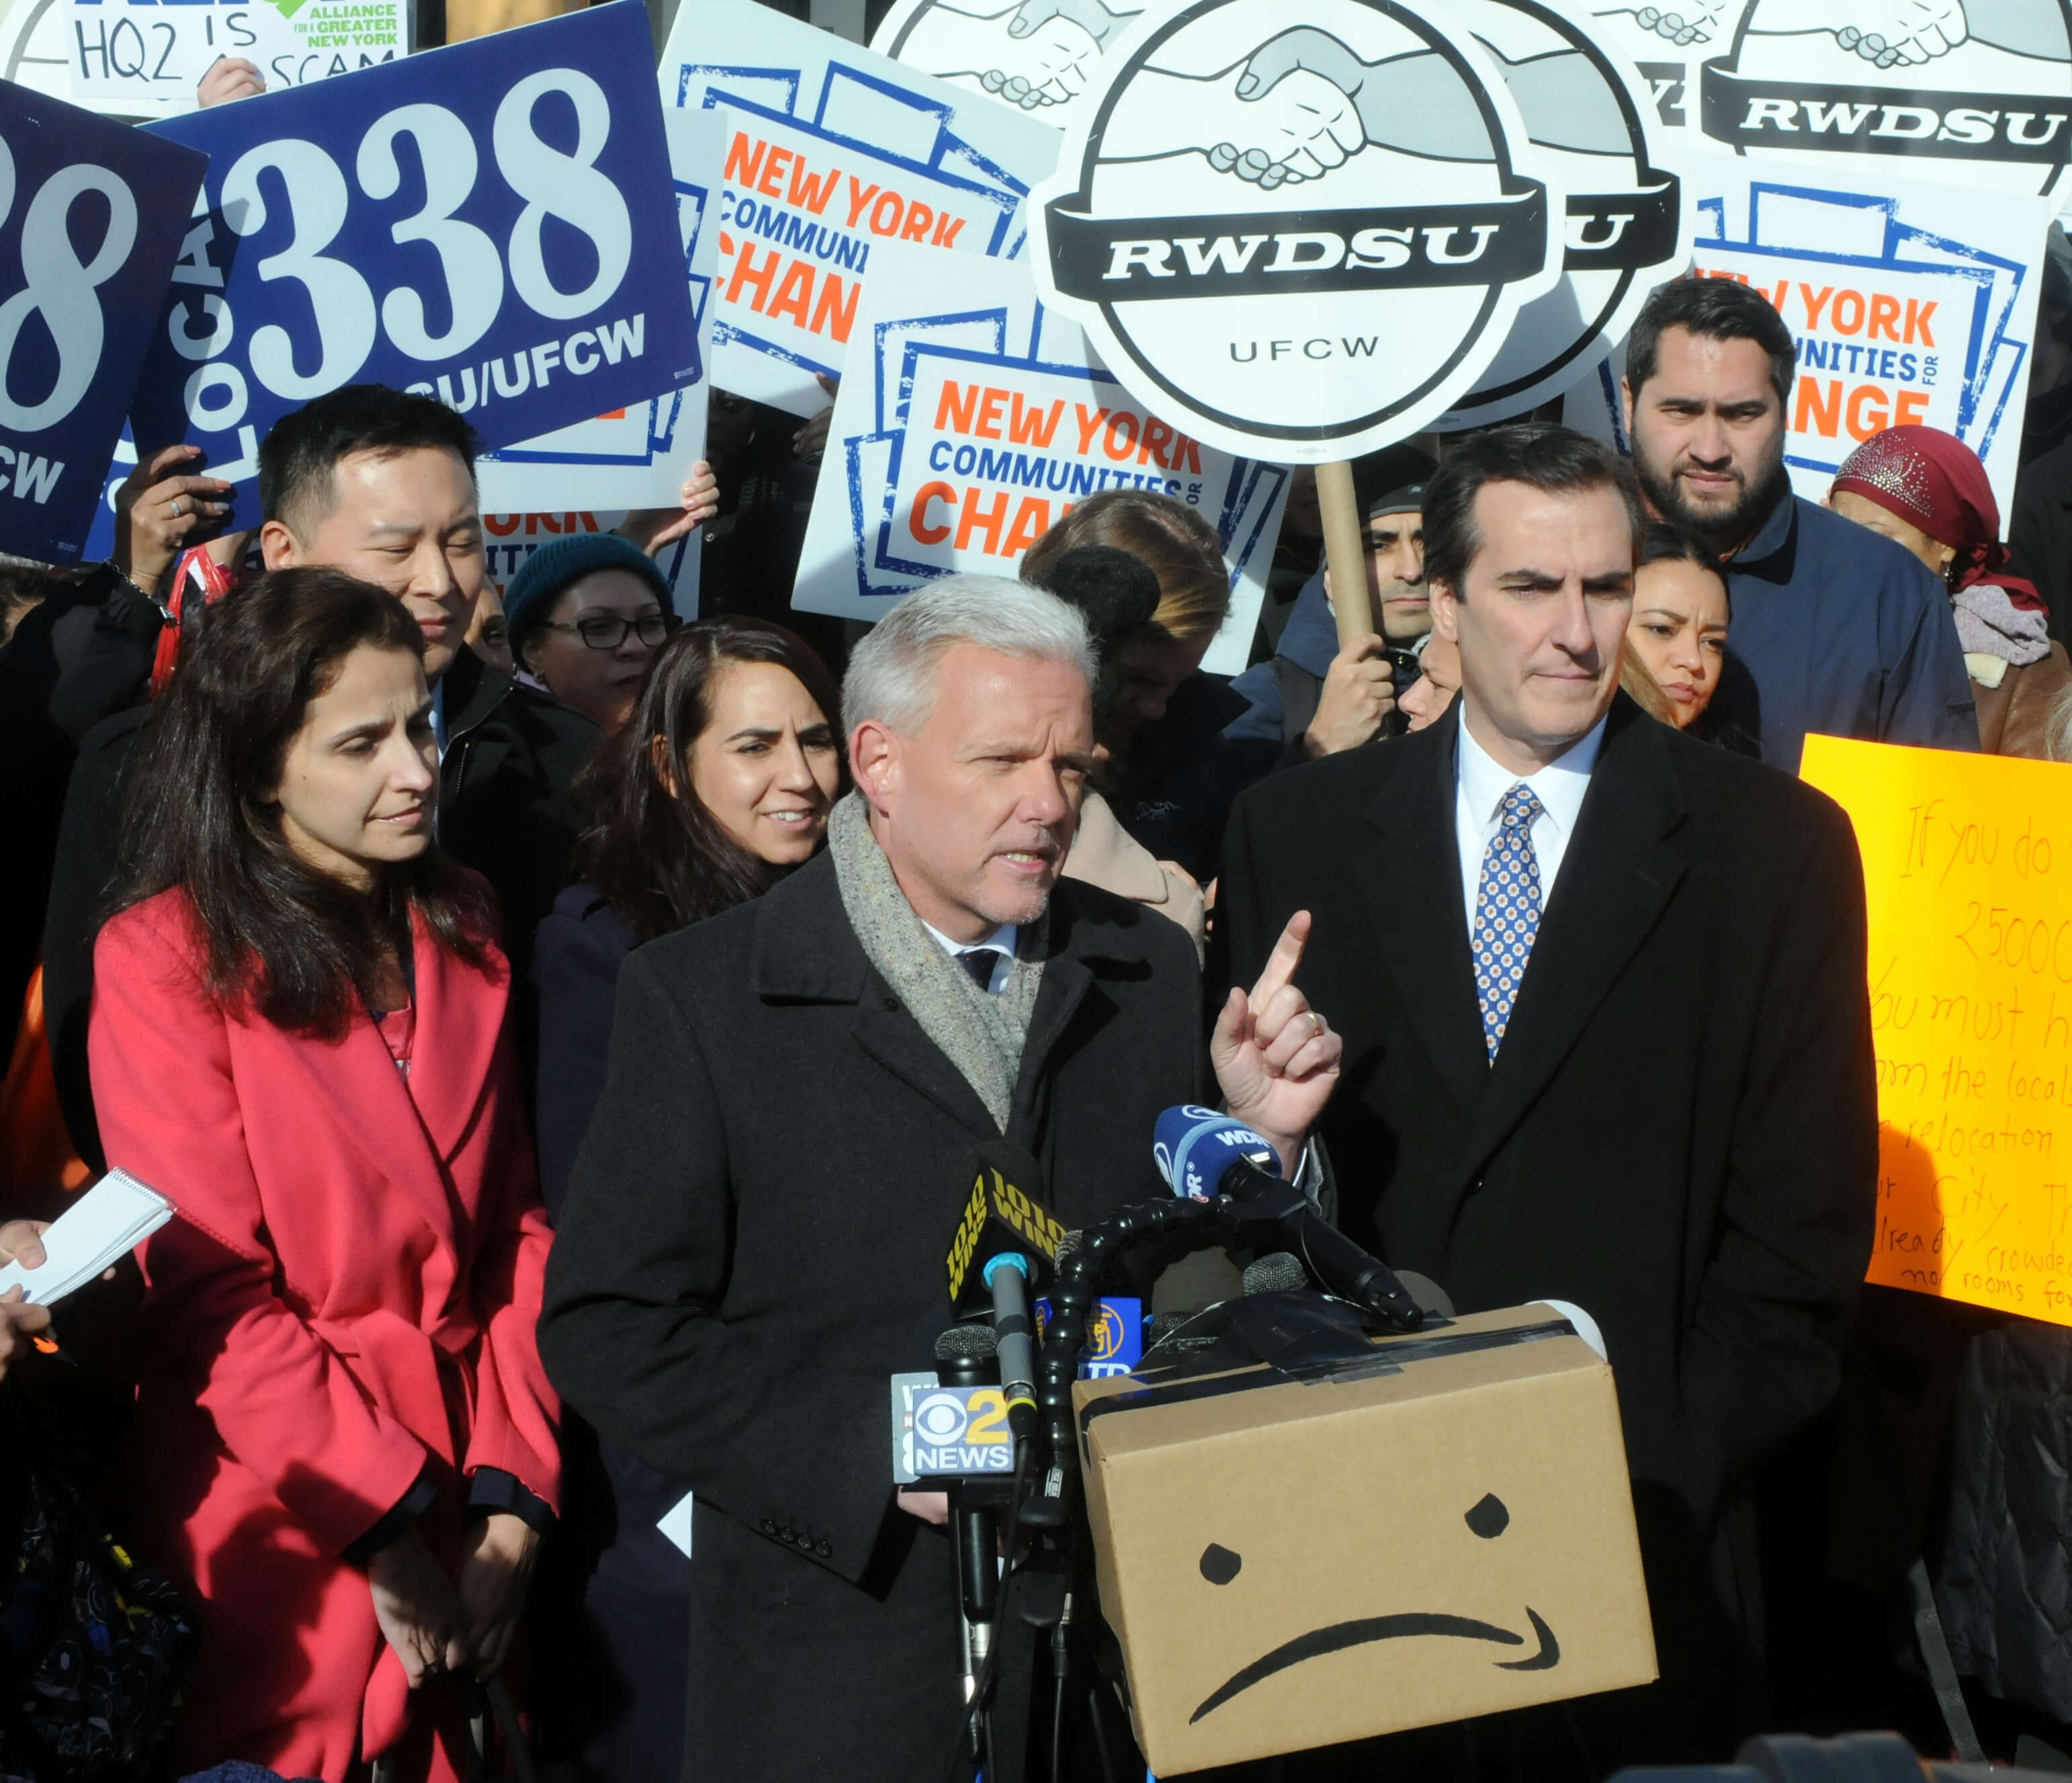 City Councilman Jimmy Van Bramer and state Senator Michael Gianaris speak at a Nov. 14 rally against the Amazon second headquarters project in Long Island City.